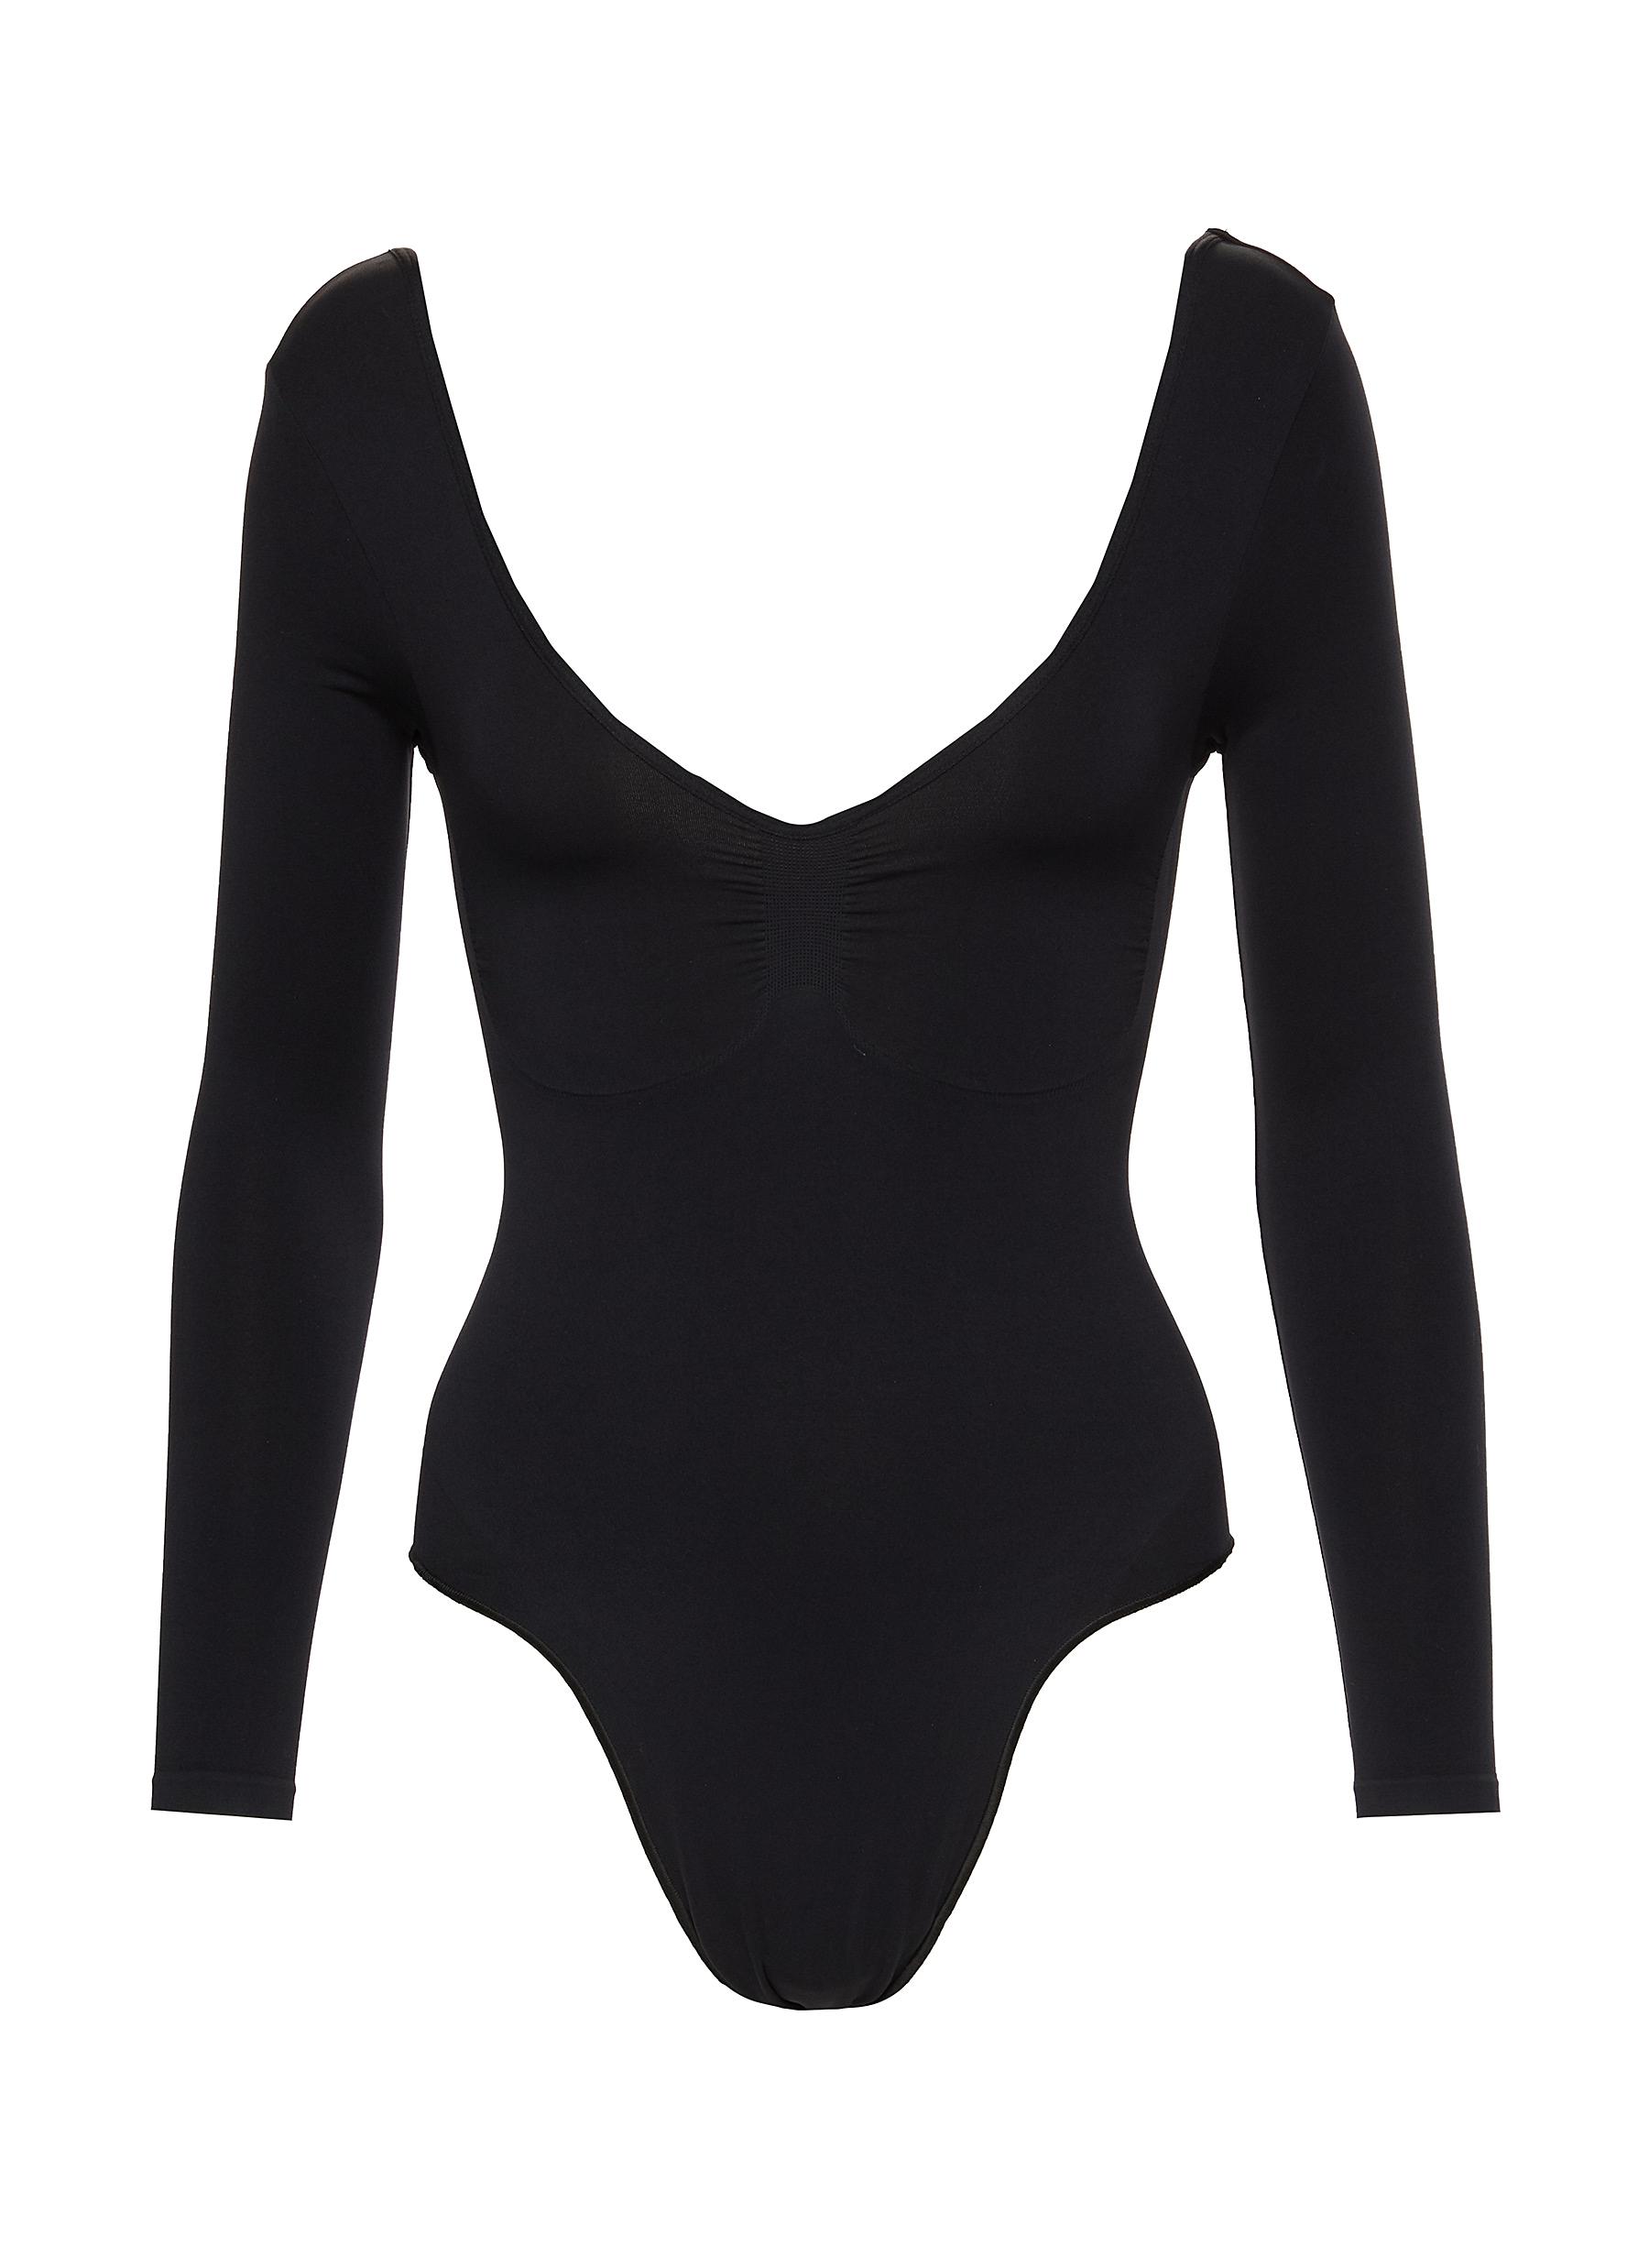 Stretchy and Sculpting Firm Shape Thong Bodysuit - Black - Ladies